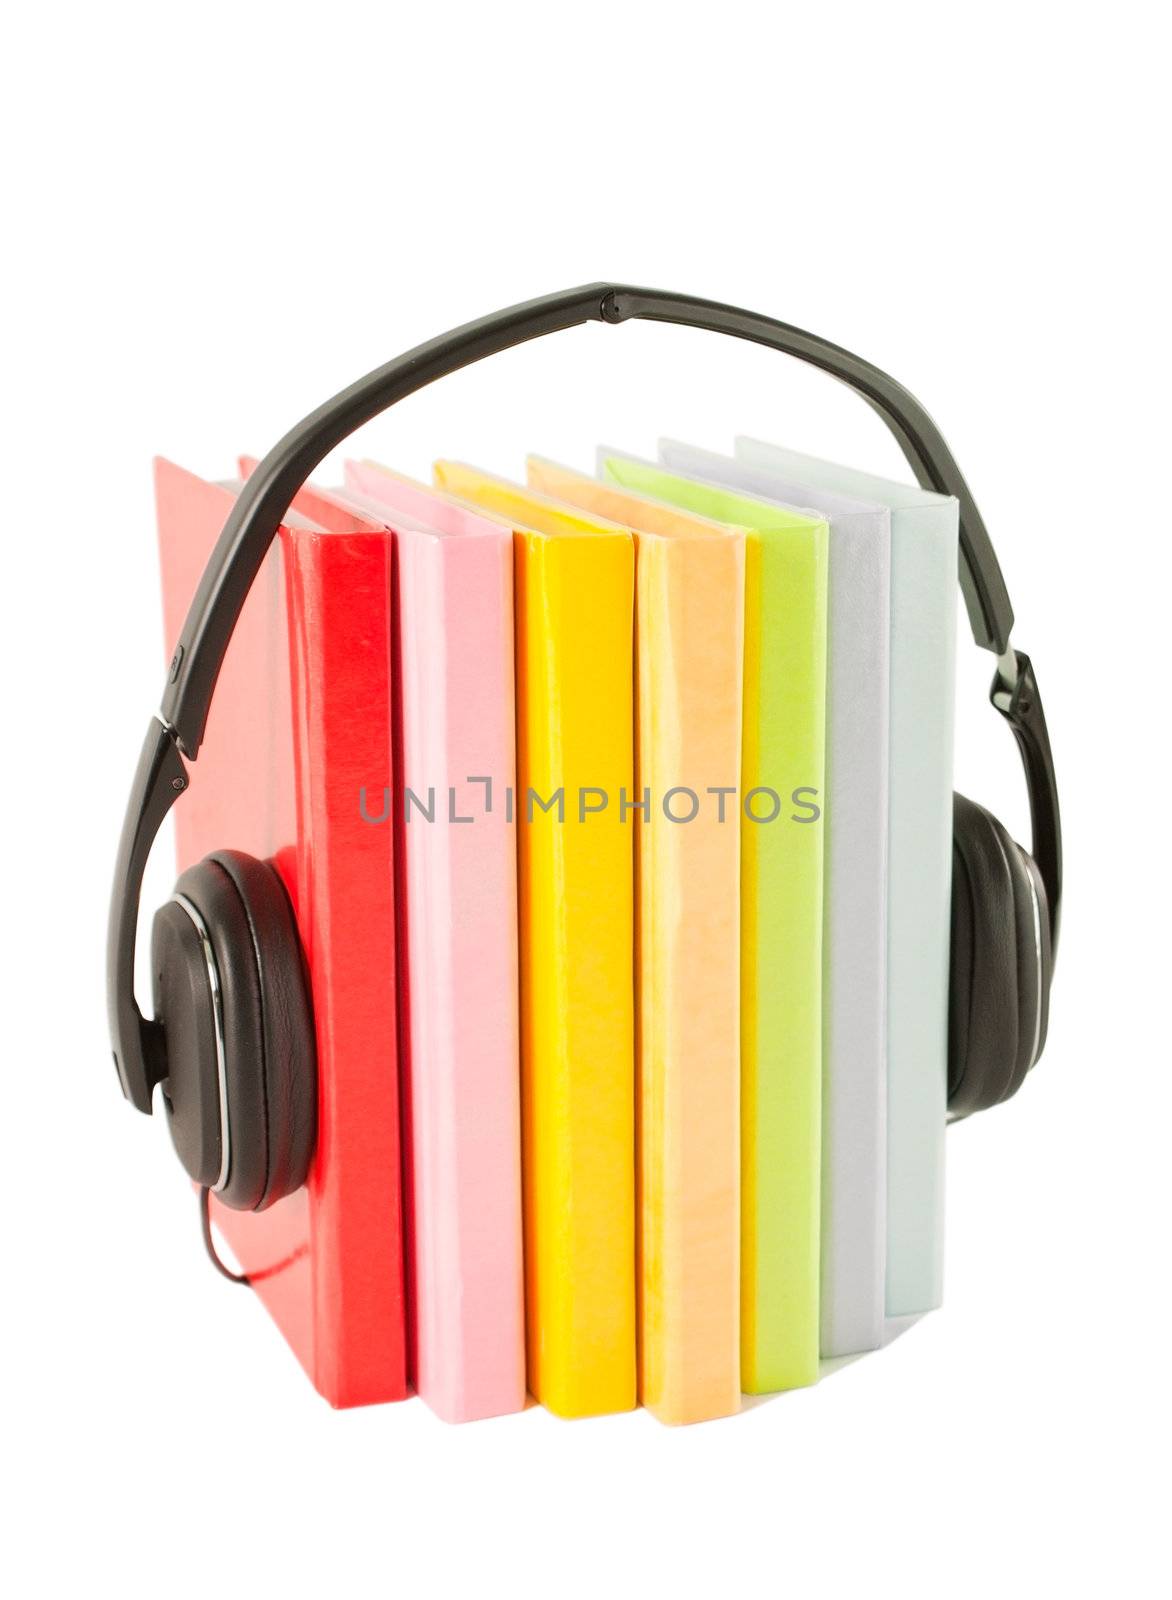 Audiobooks concept by AndreyKr